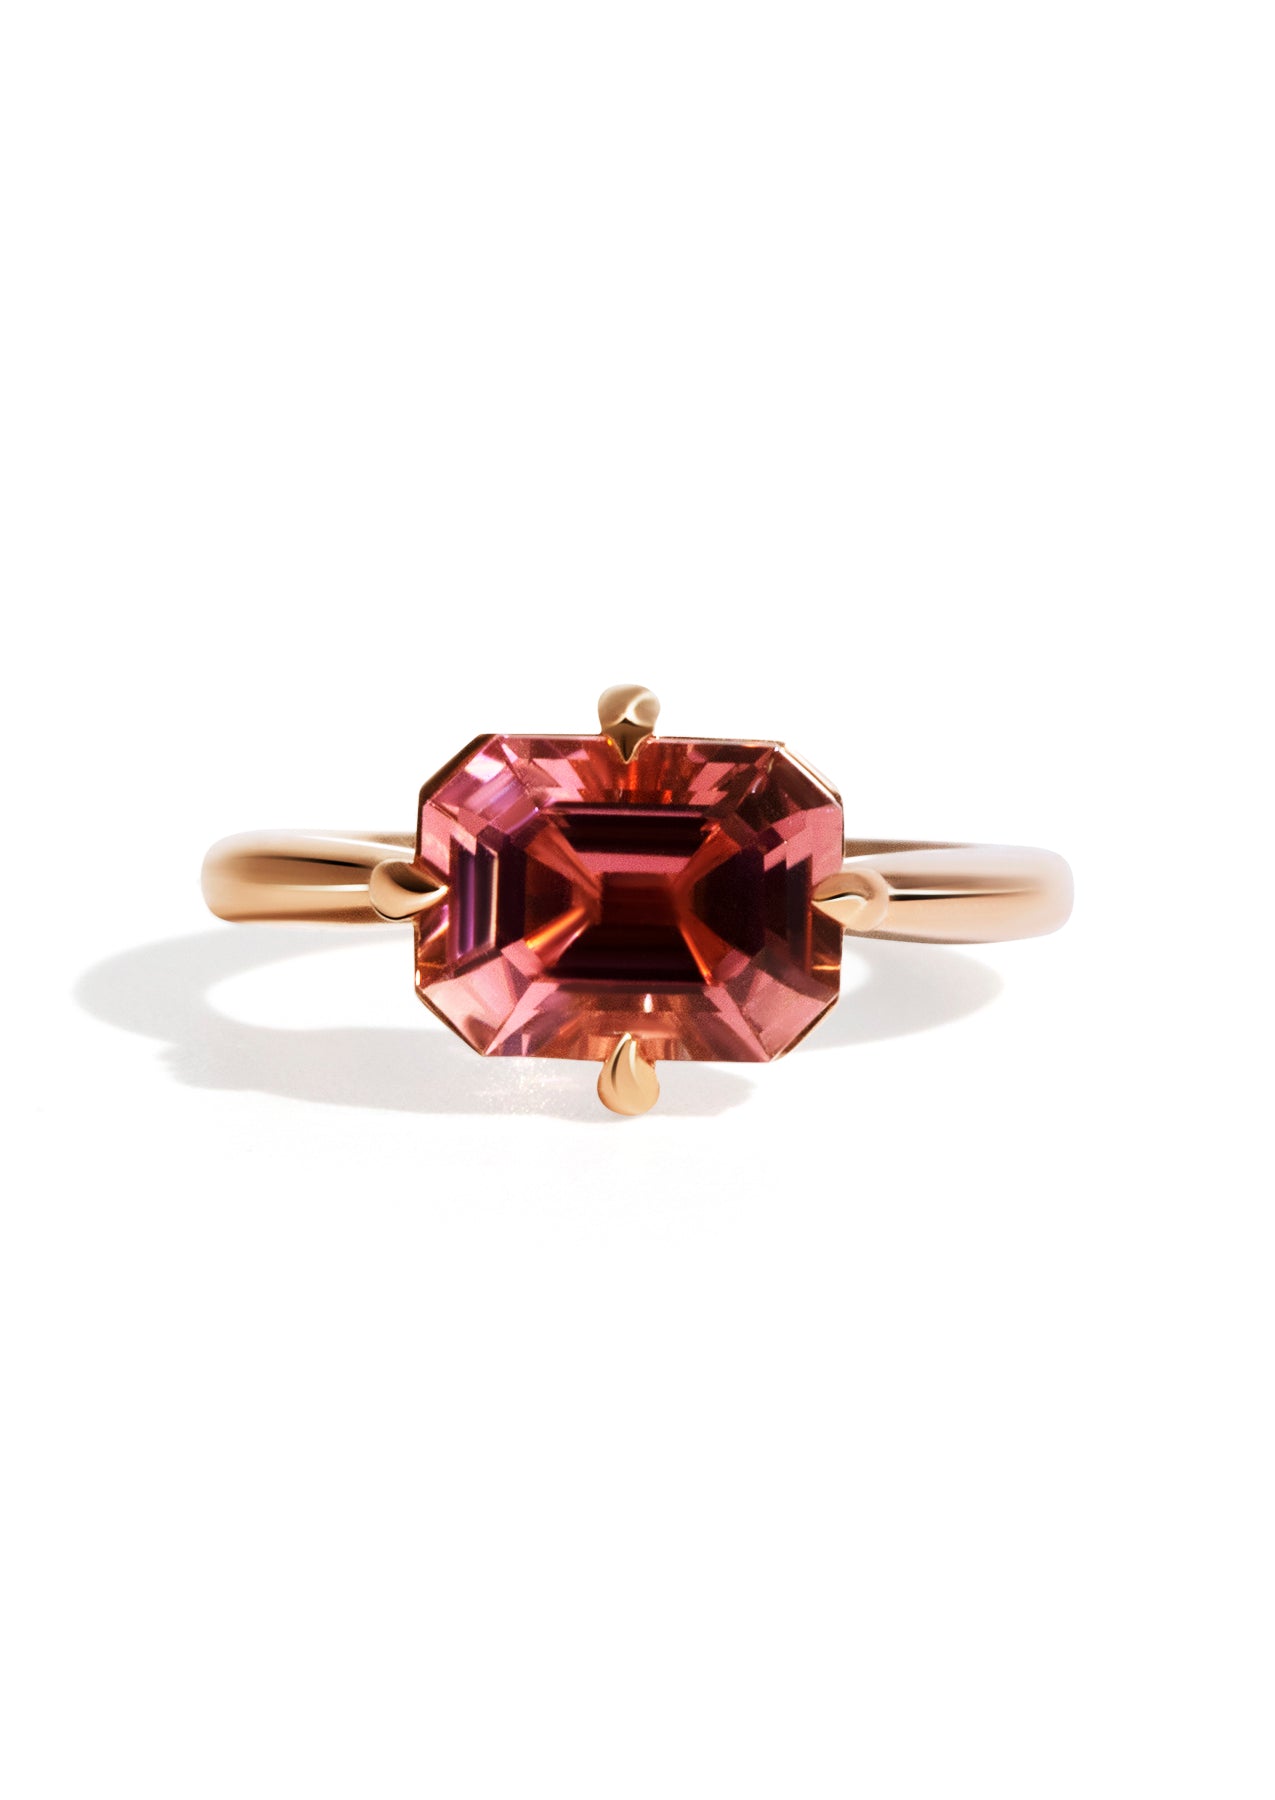 The Radia Ring with 2.94ct Tourmaline